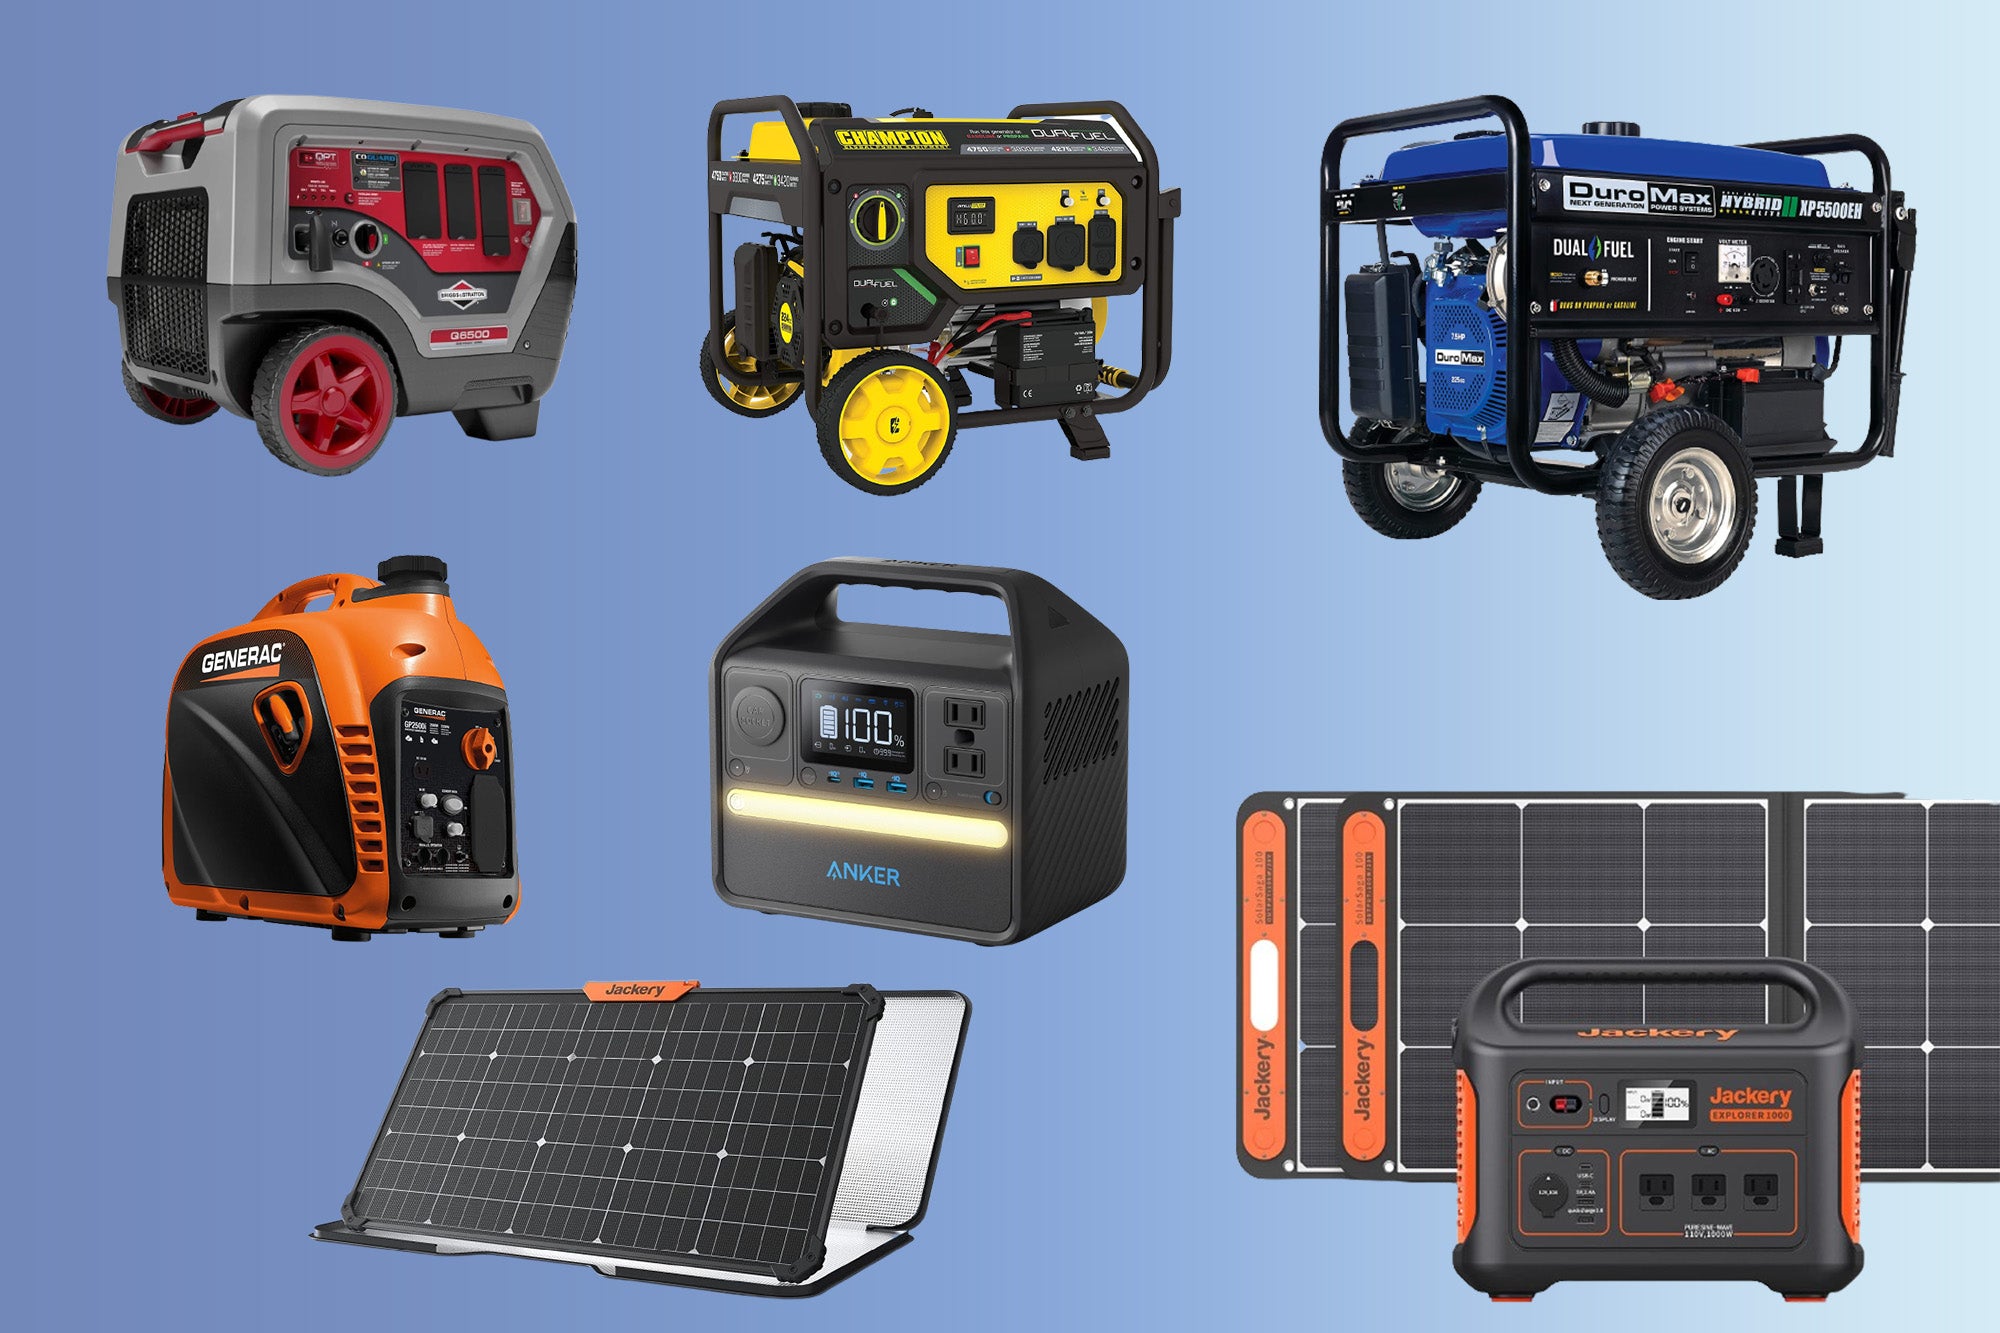 The best Memorial Day generator deals offer powerful savings on solar, electric, & gas-powered models